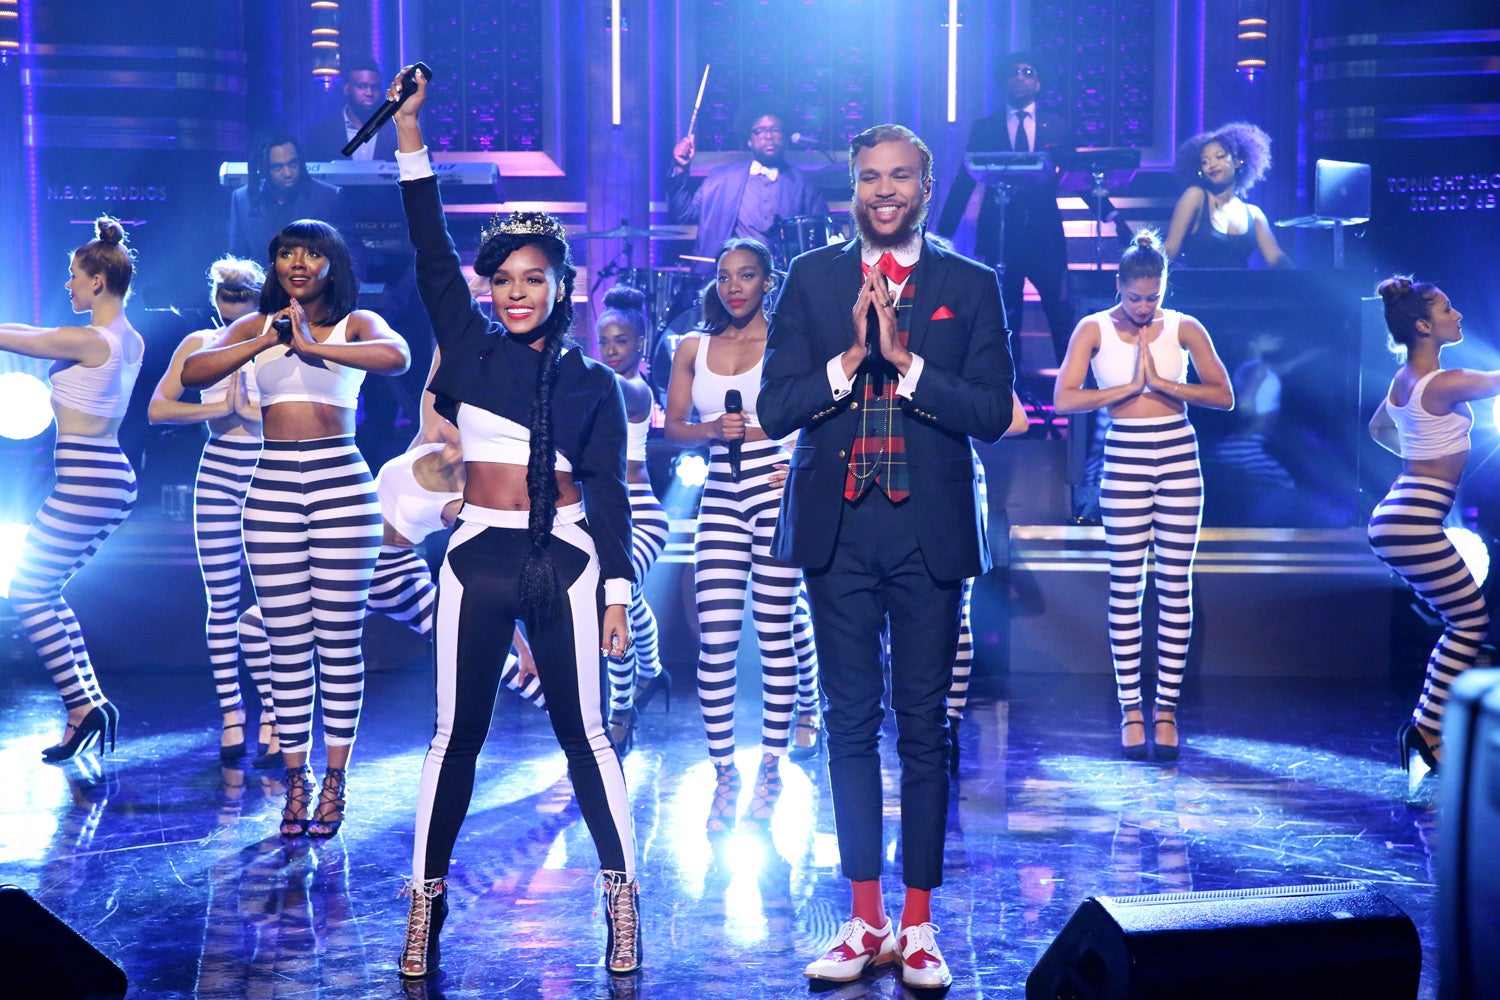 Watch Janelle Monae Perform with Her New Protegé on "Jimmy Fallon"